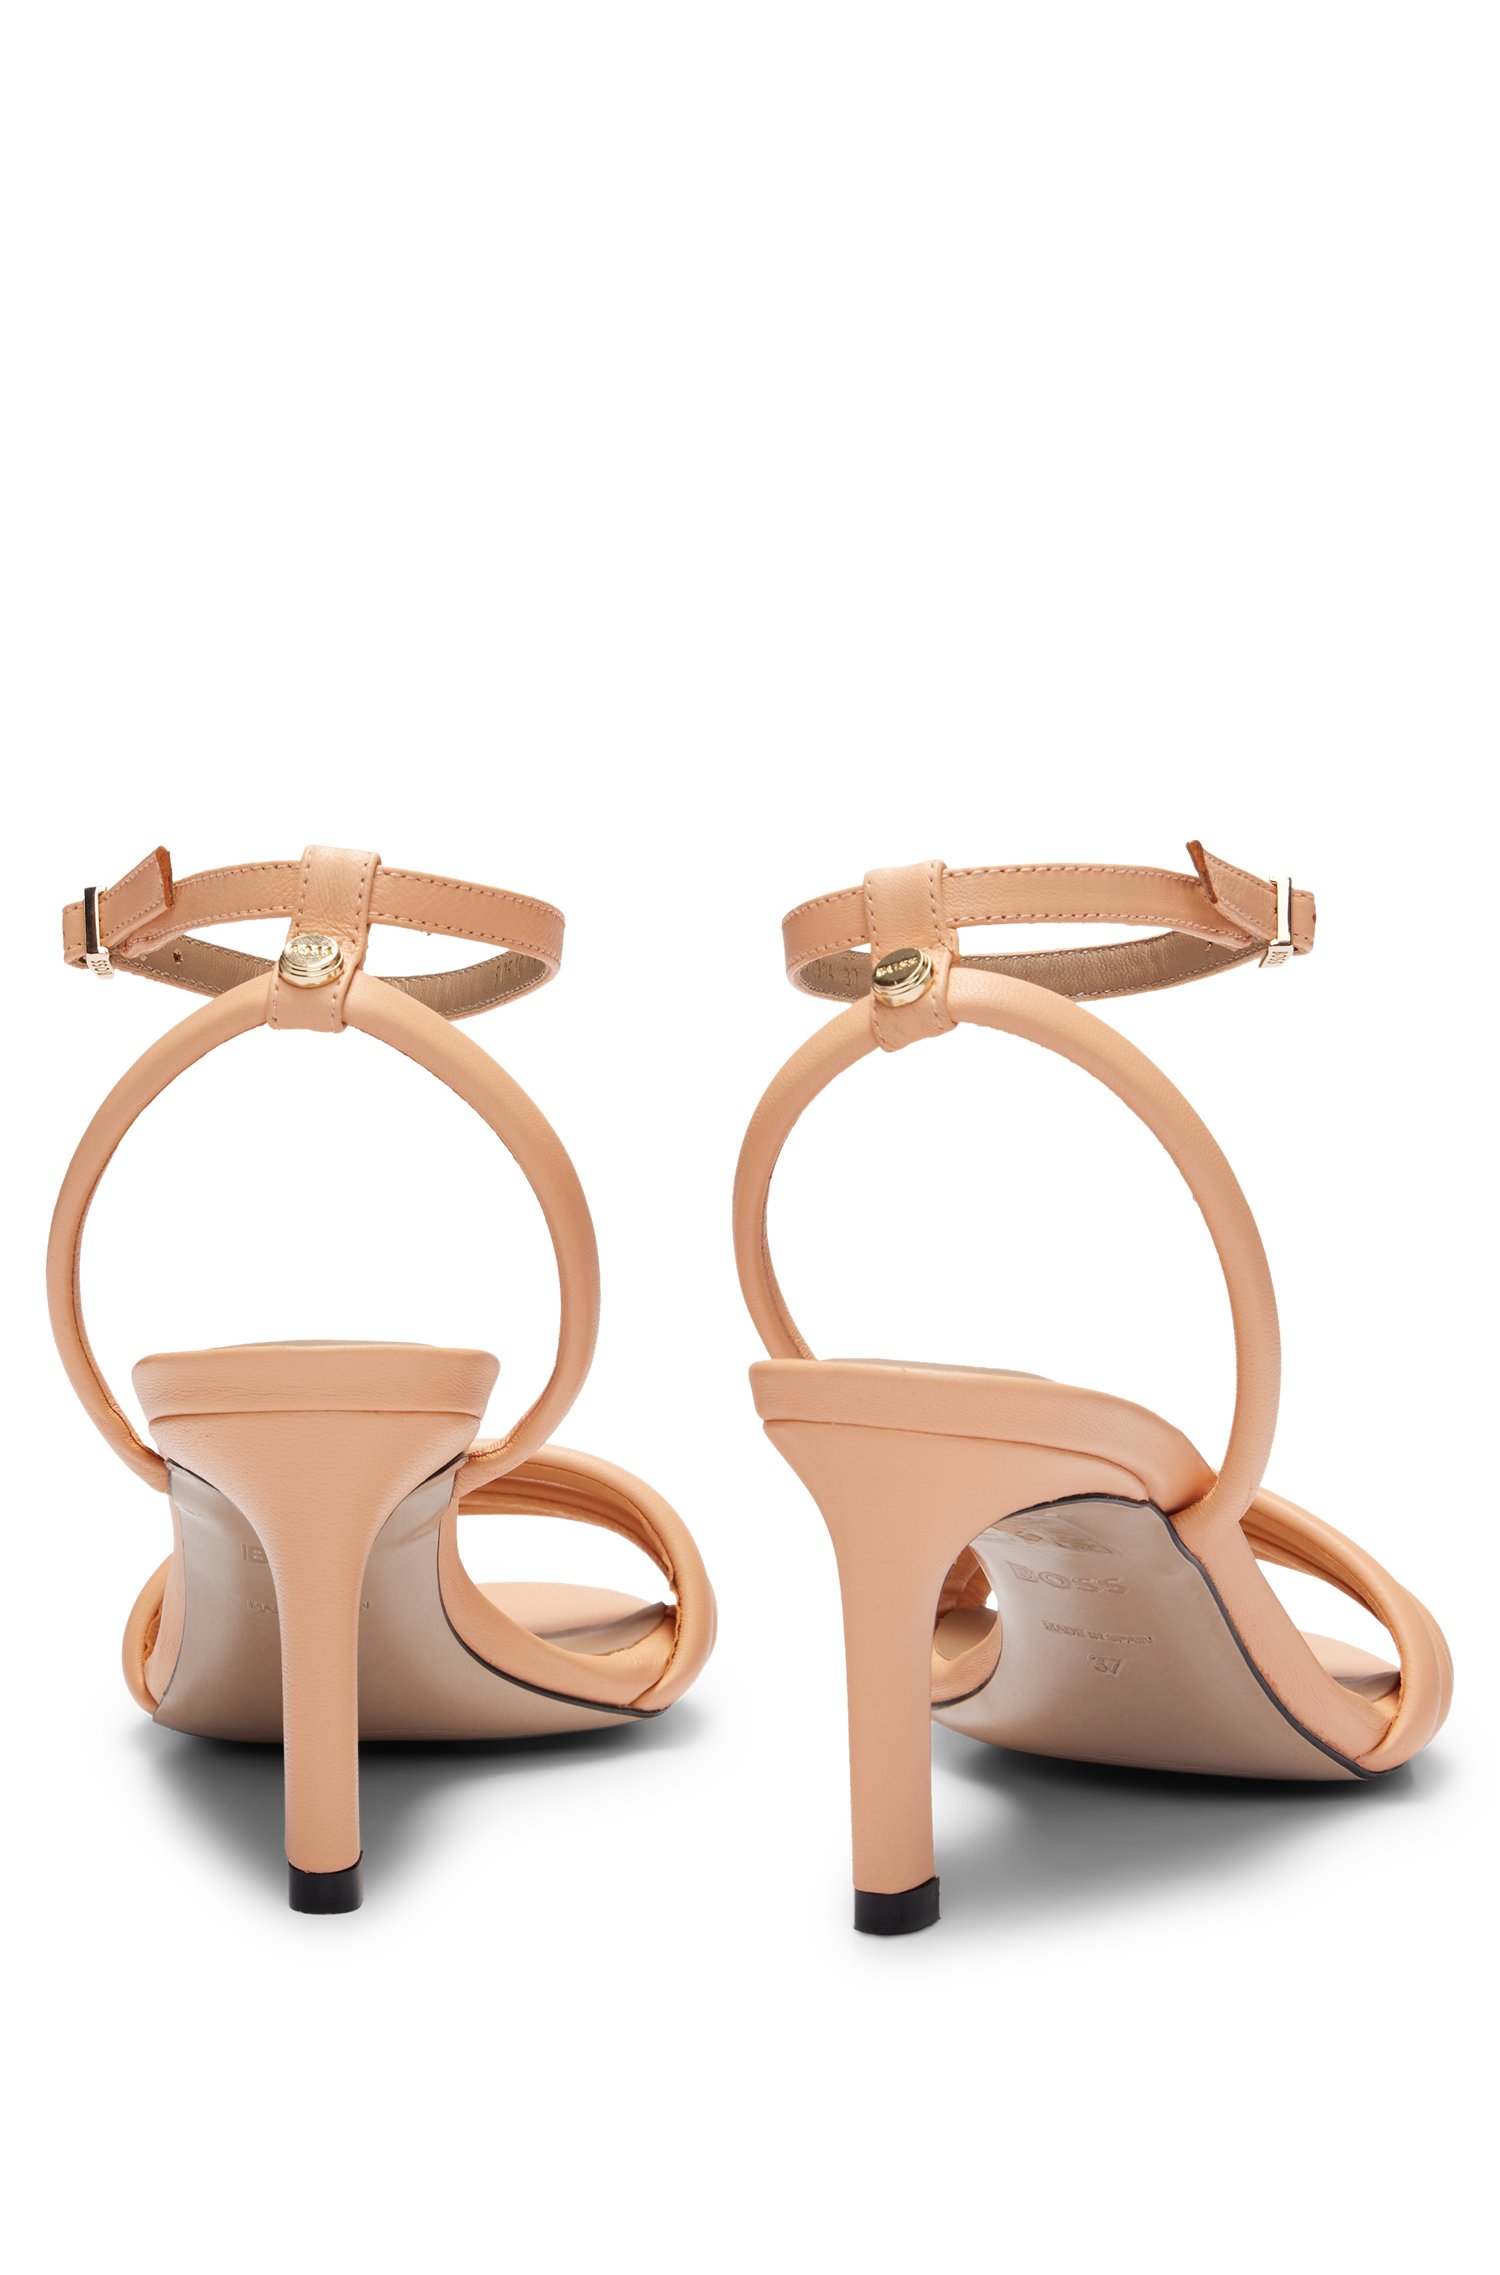 Strappy sandals nappa leather with a 7cm heel